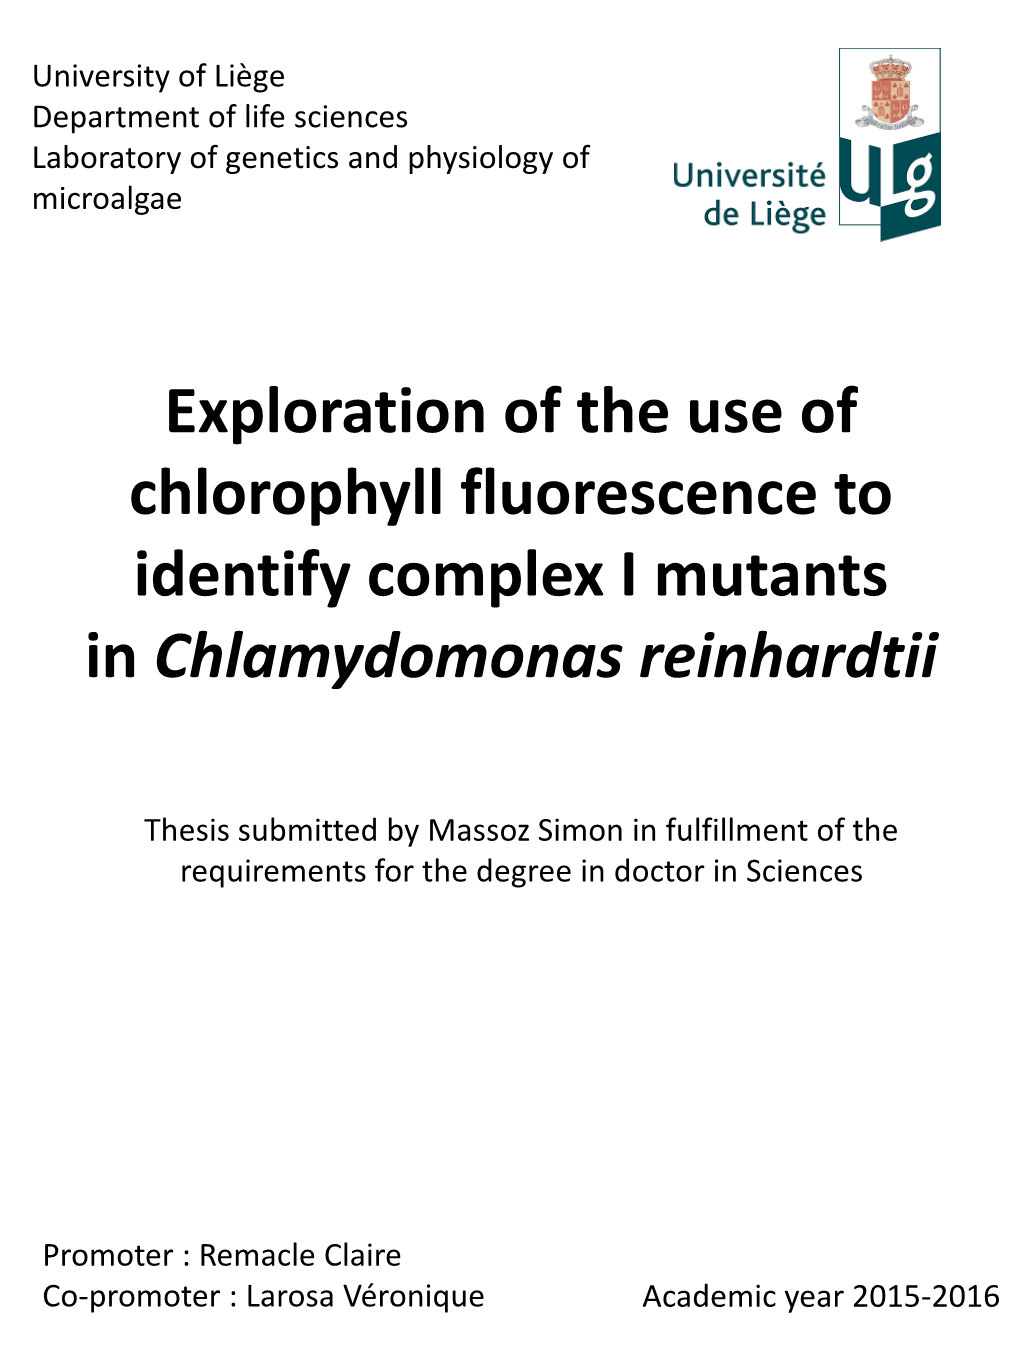 Exploration of the Use of Chlorophyll Fluorescence to Identify Complex I Mutants in Chlamydomonas Reinhardtii